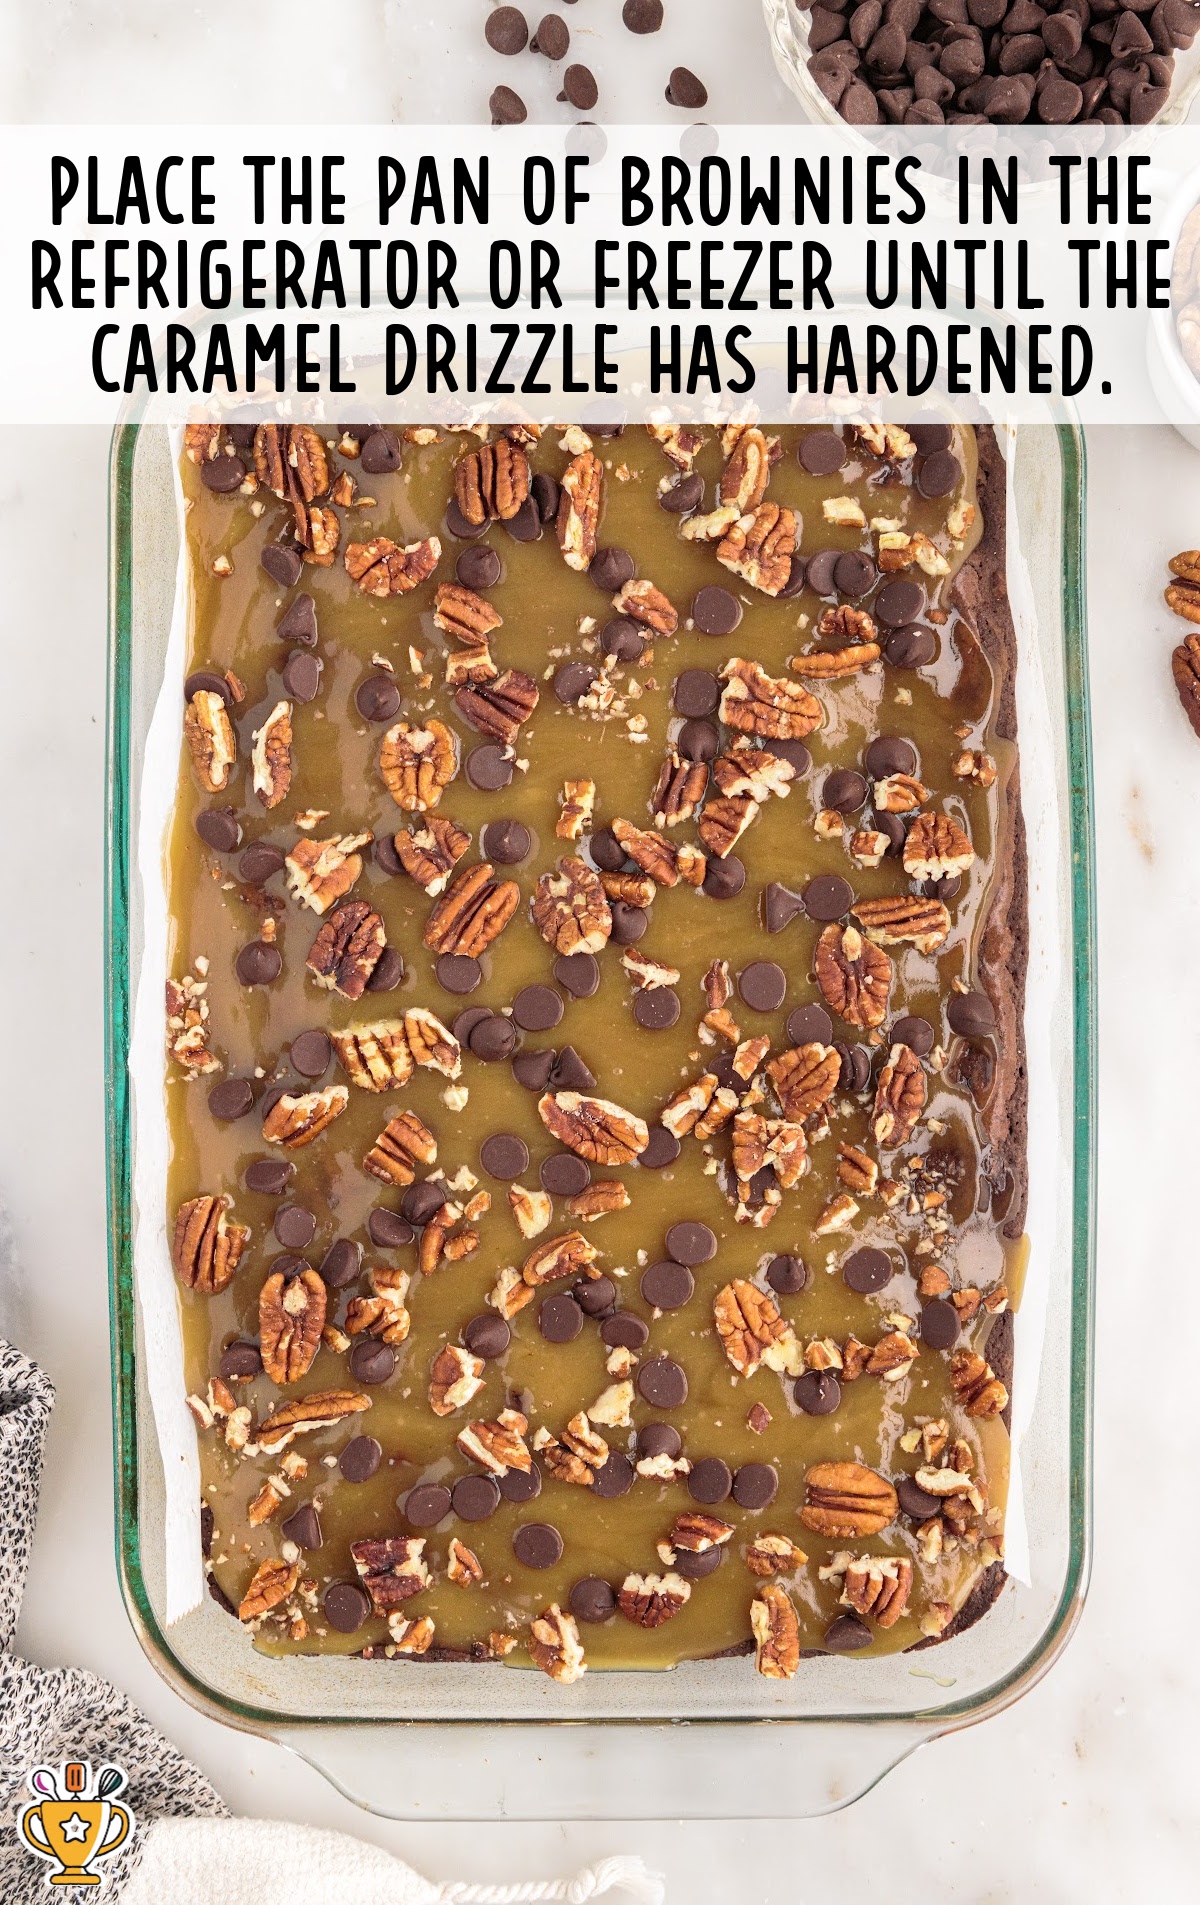 place pan in the freezer or refrigerator until caramel hardens